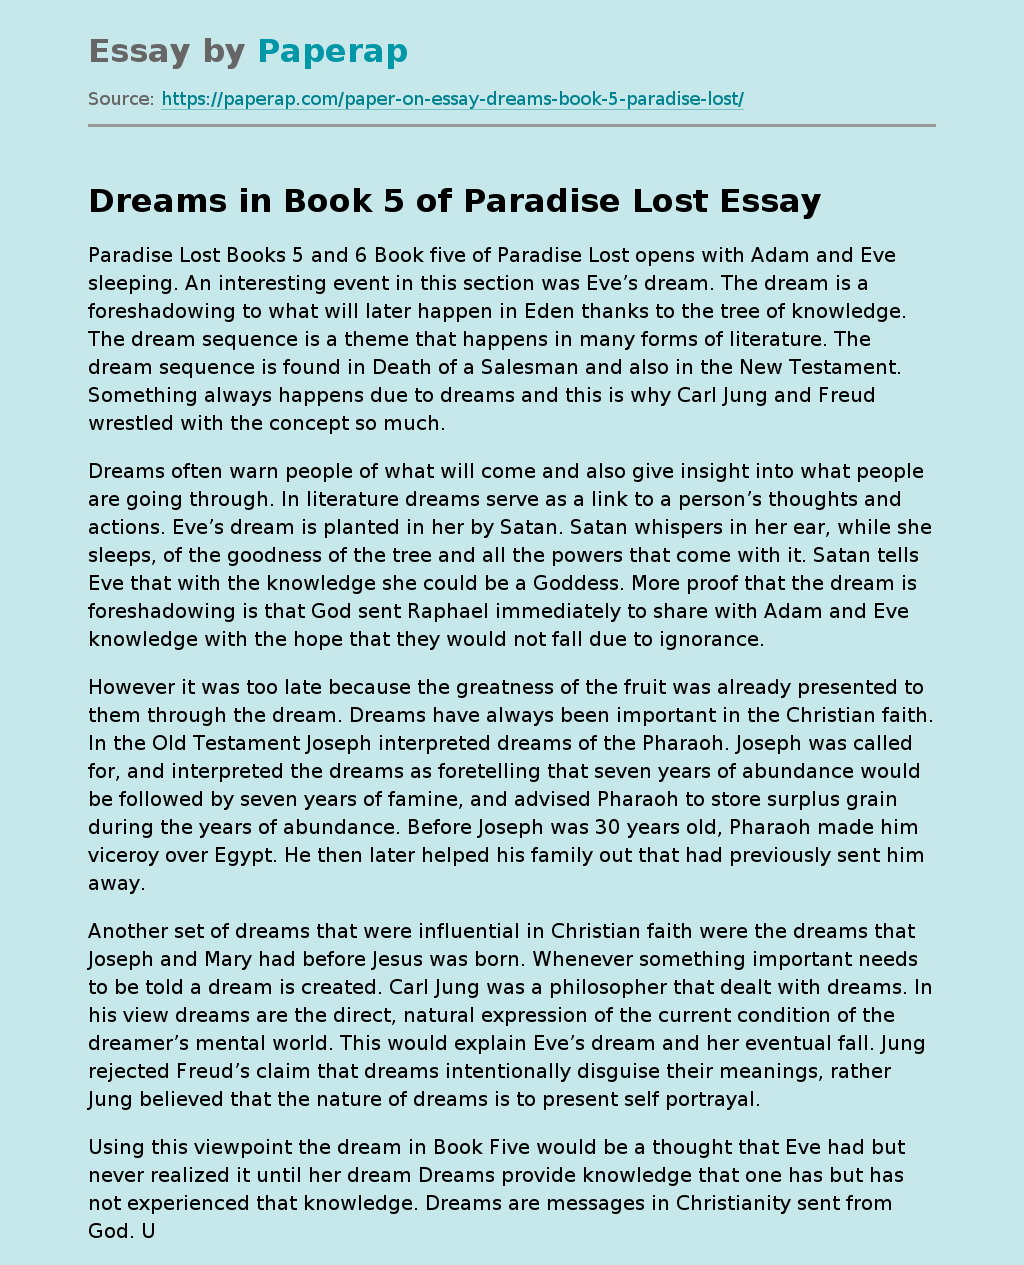 Dreams in Book 5 of Paradise Lost